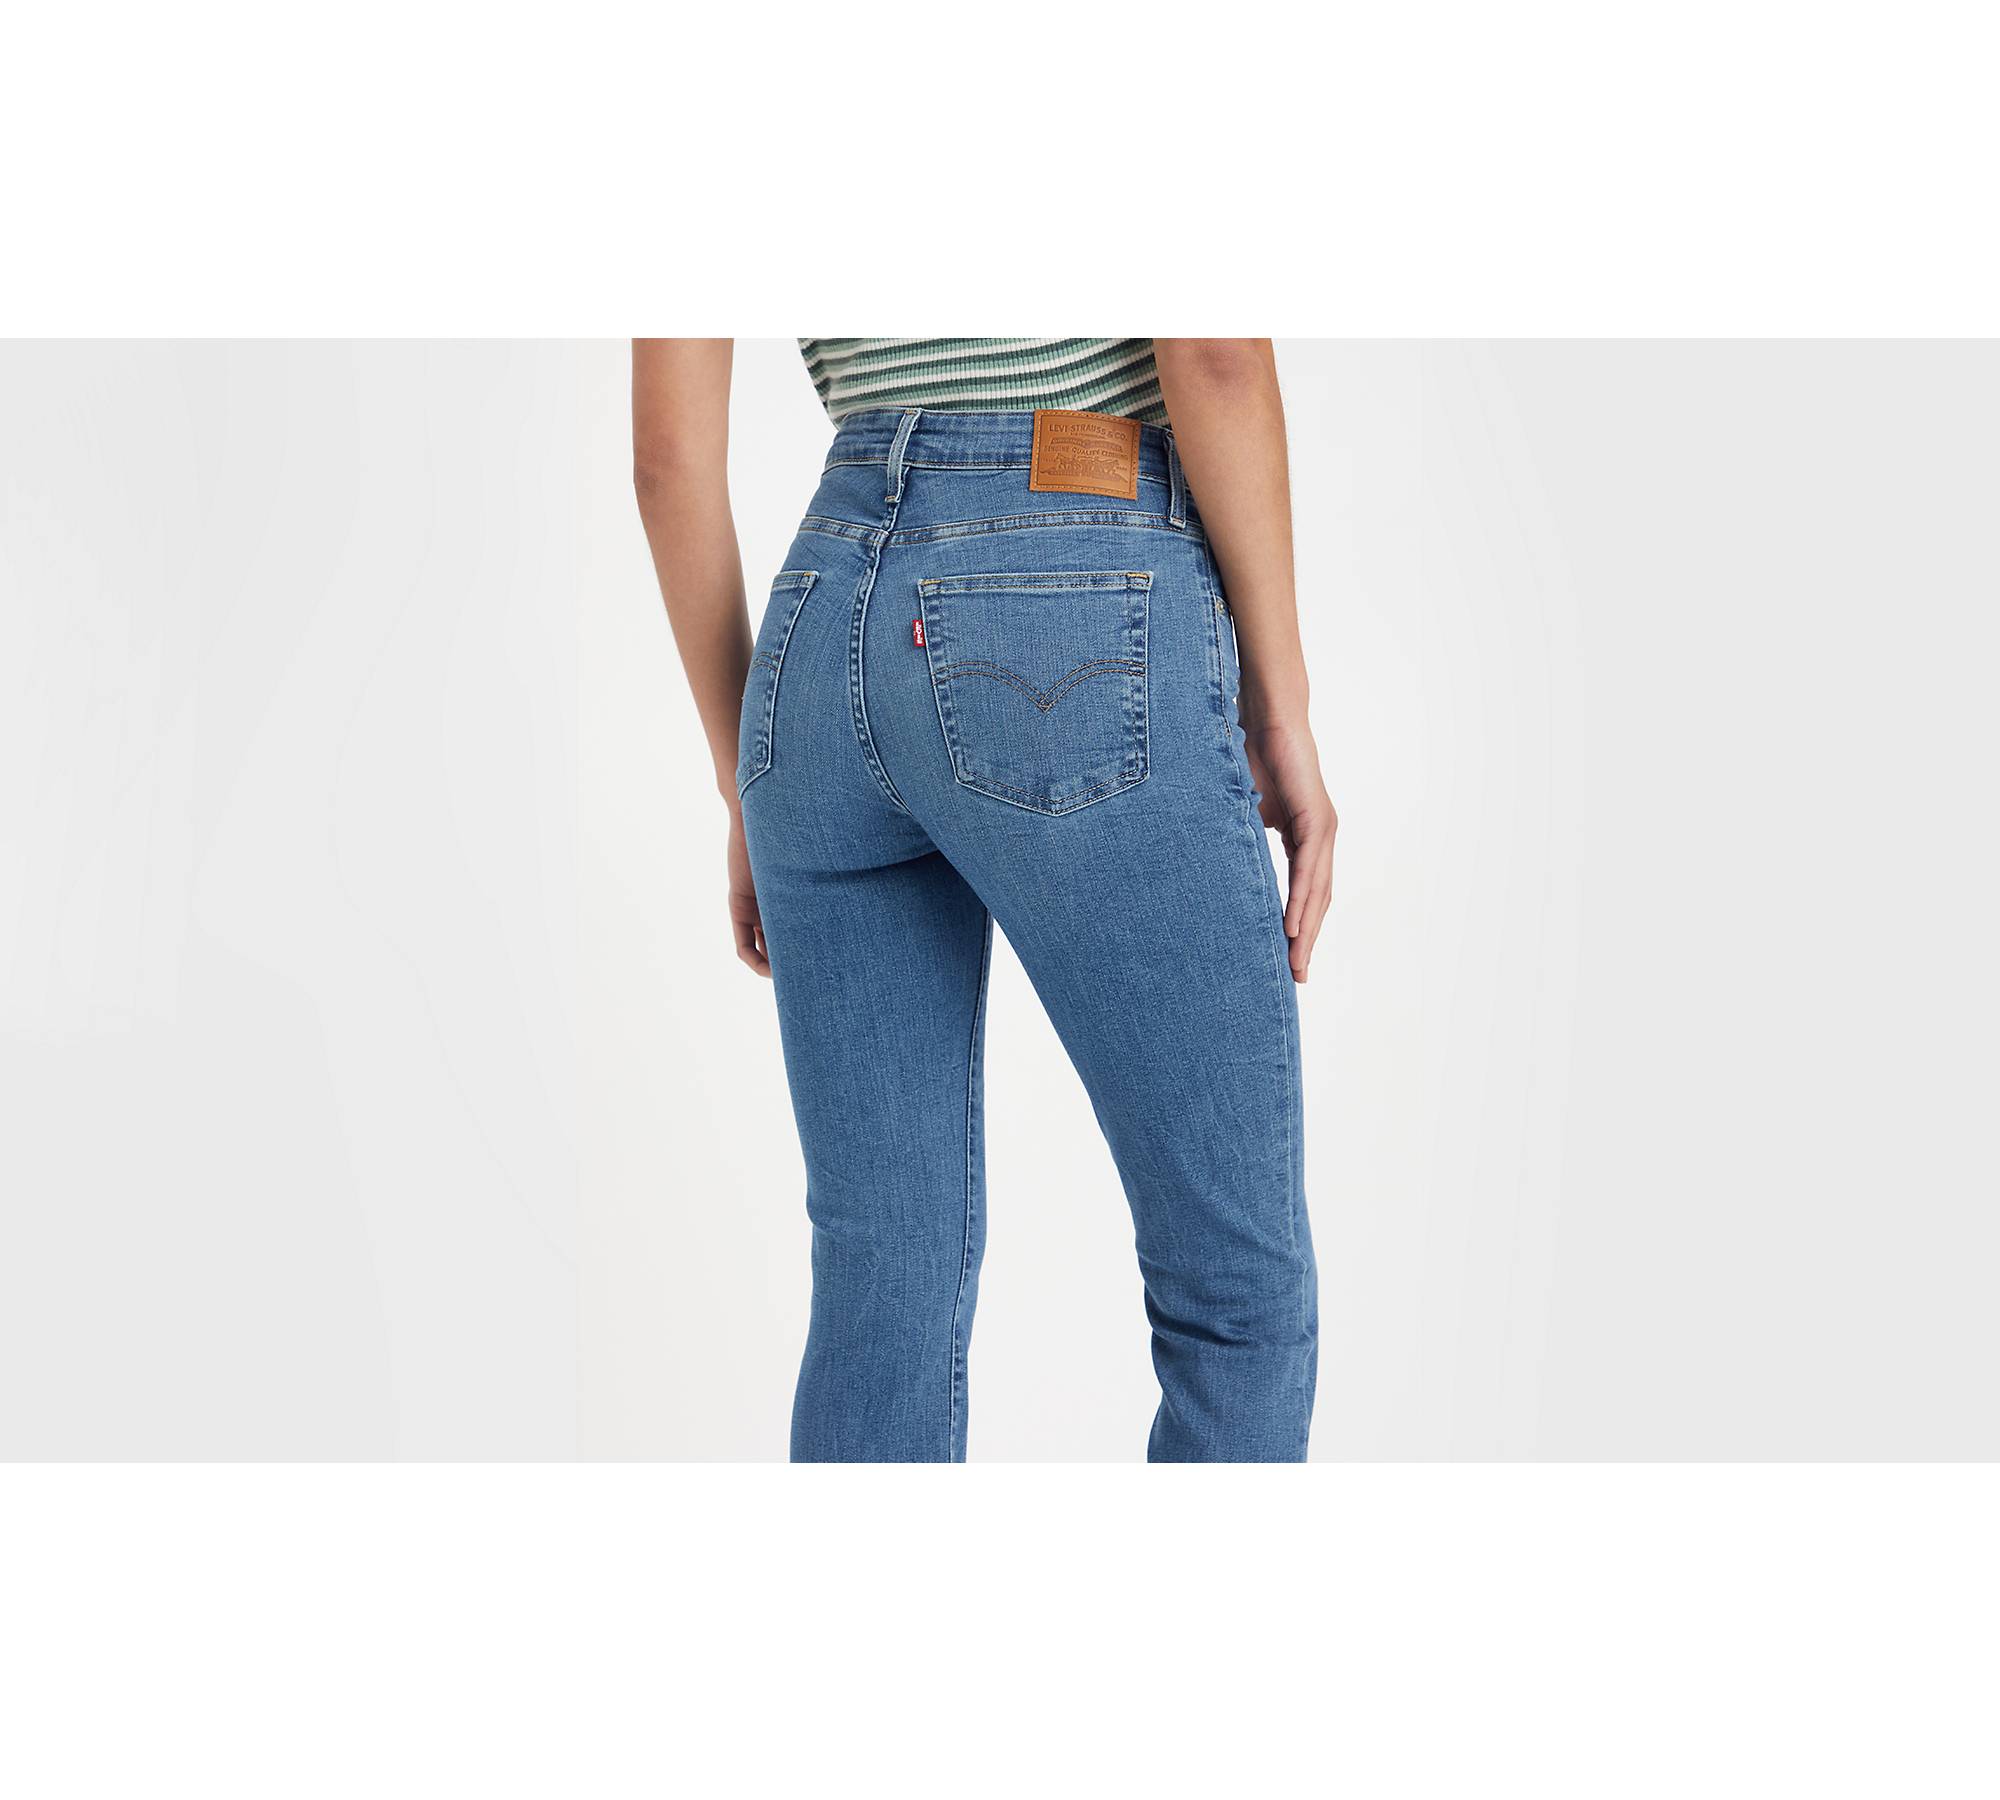 Jeans Levis 725 High Rise Bootcut 18759-0081 Mujer Original